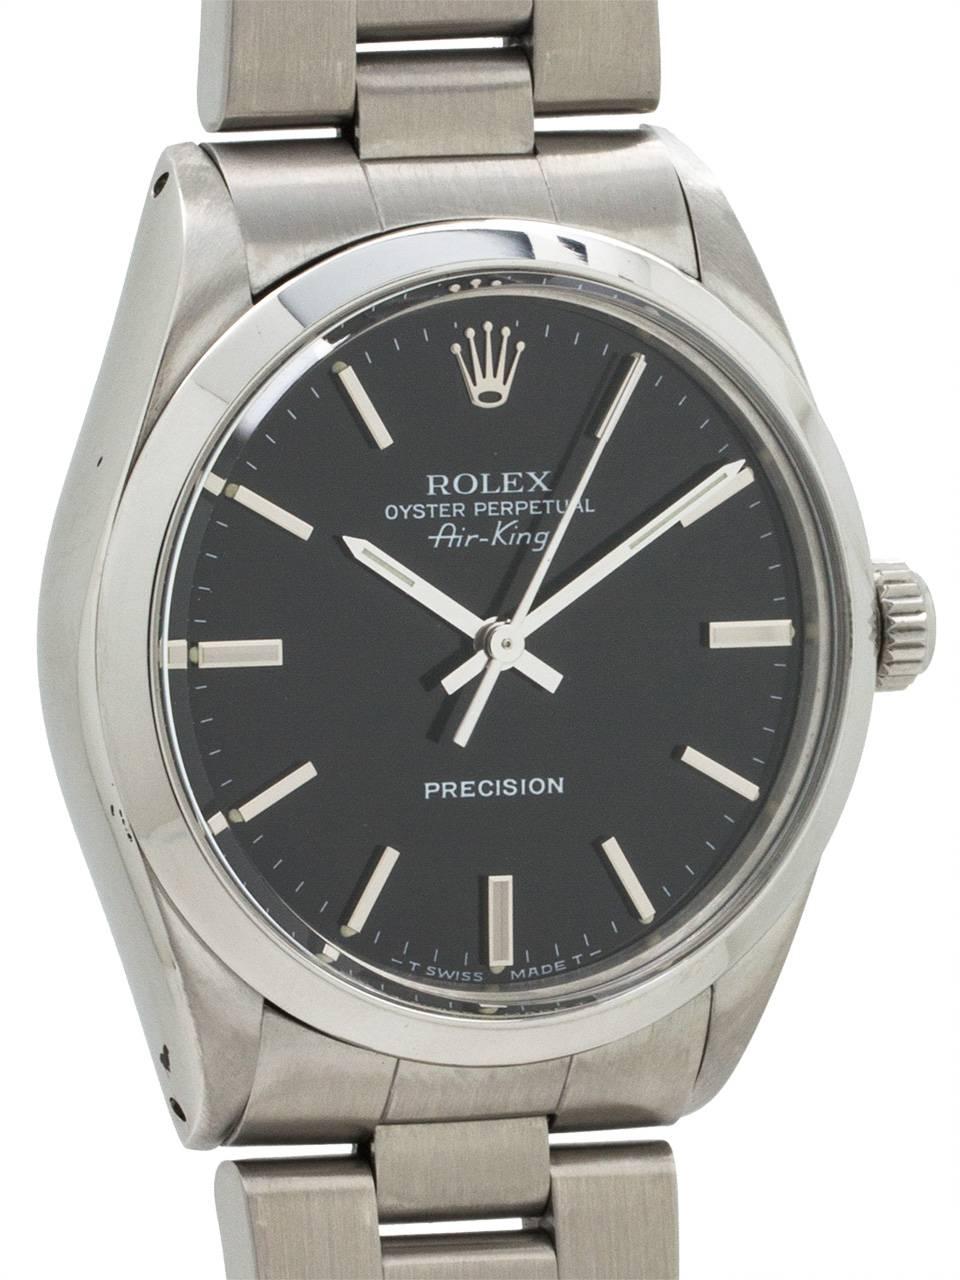 
Rolex Oyster Perpetual Airking ref 5500 8.1 million serial # circa 1984. Featuring 34mm diameter Oyster case with smooth bezel, acrylic crystal, and beautiful condition original gloss black dial with applied silver indexes and silver baton hands.